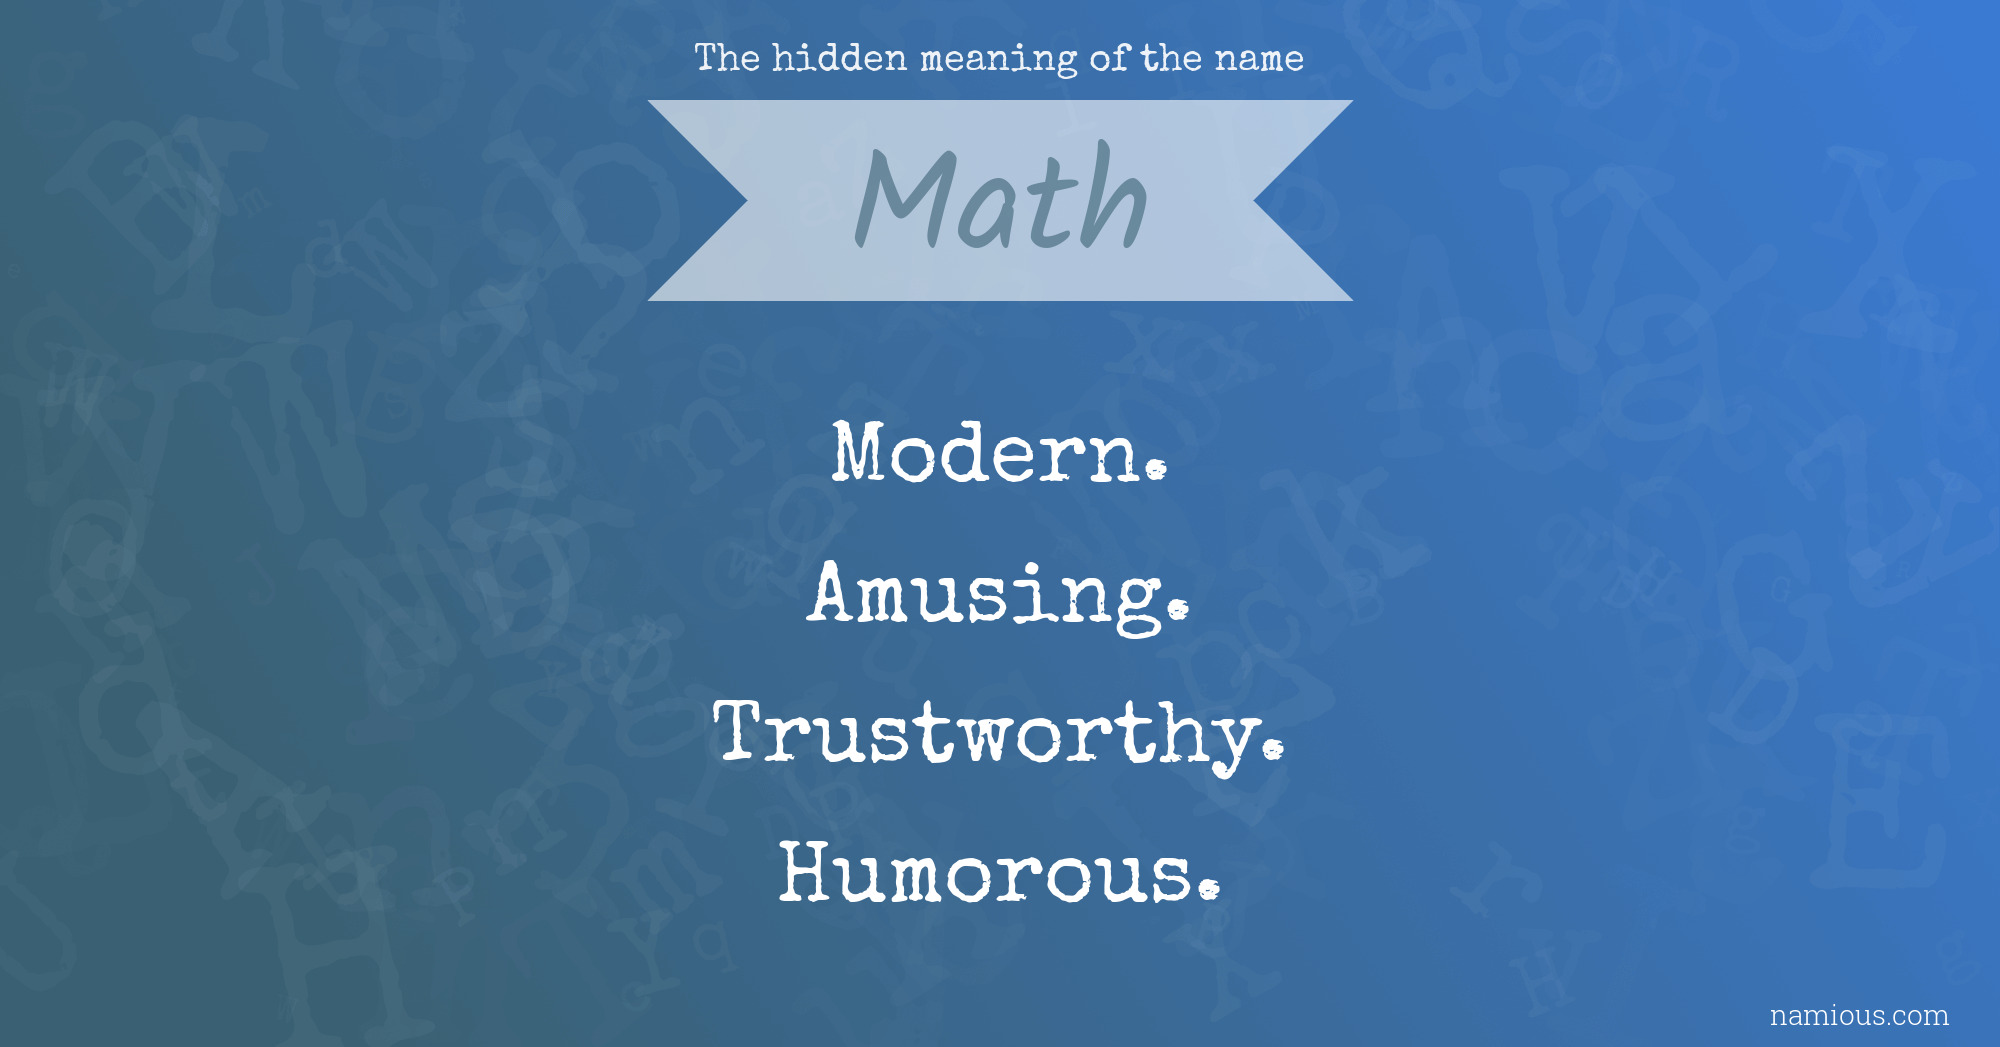 The hidden meaning of the name Math